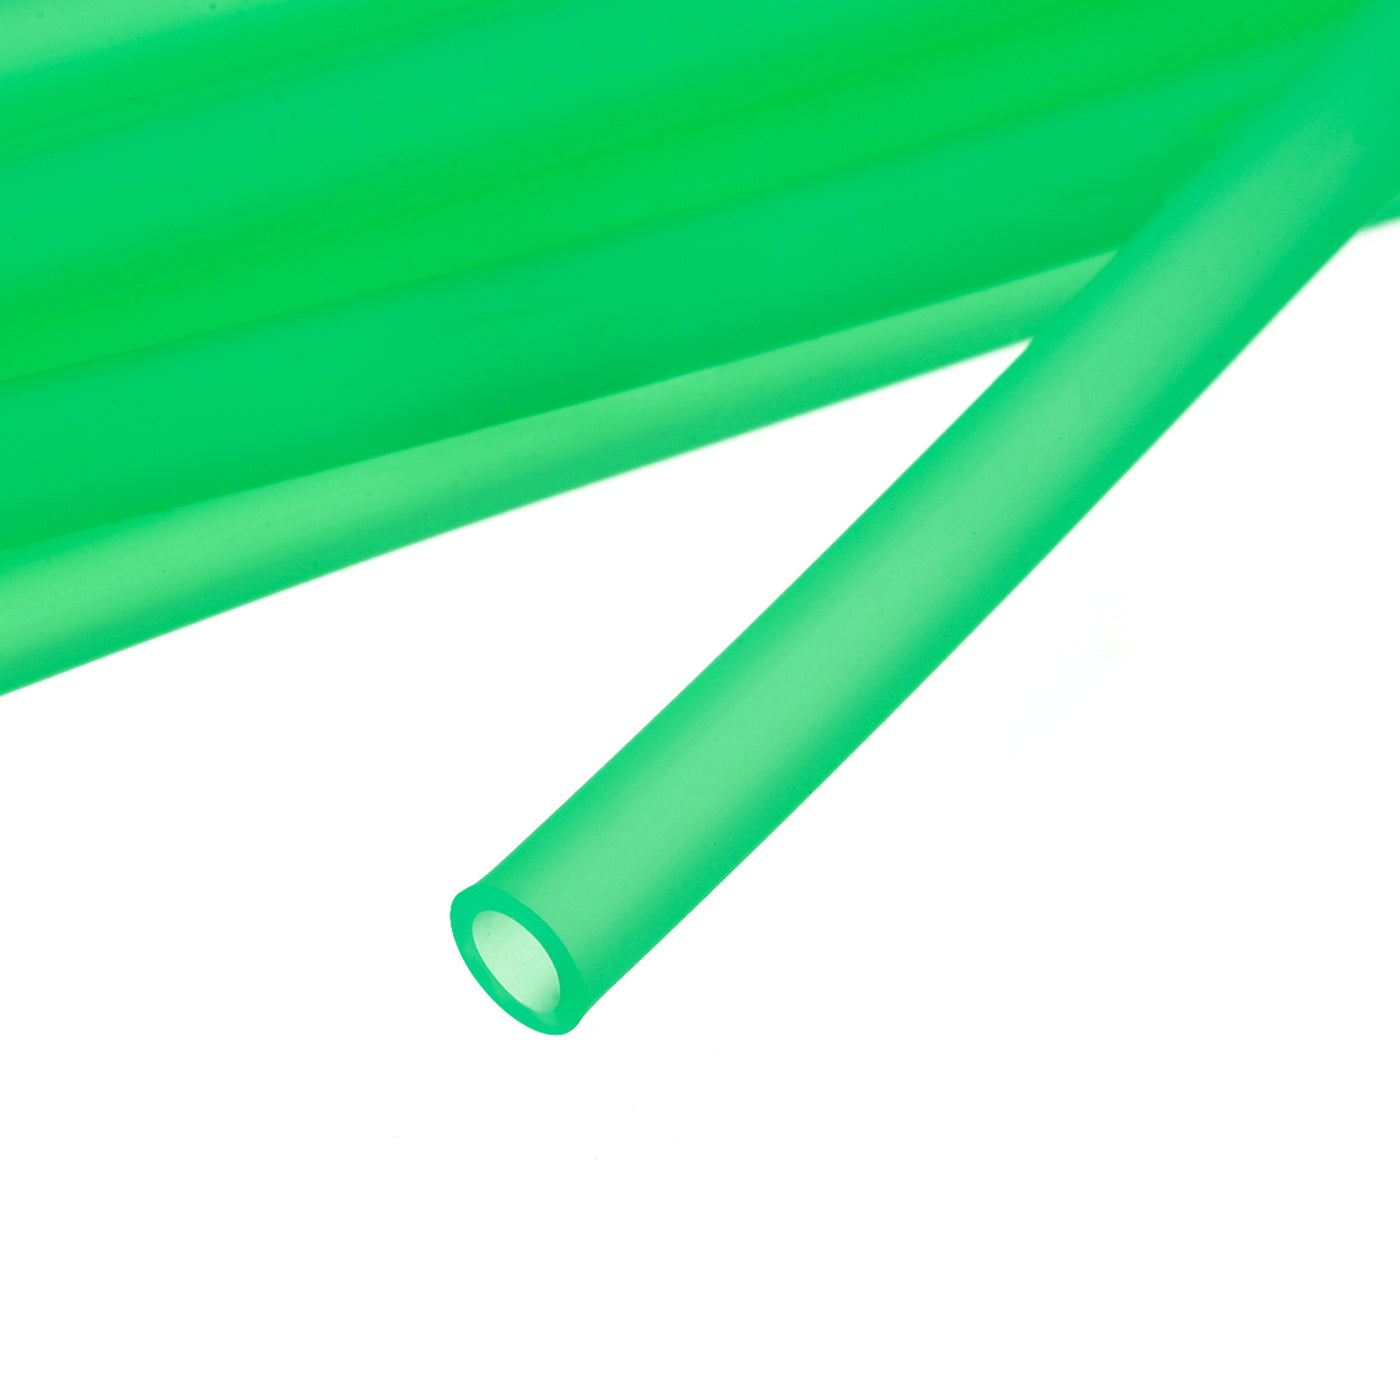 uxcell Uxcell Silicone Tubing 5/32" ID, 15/64" OD 1Pcs 13.12 Ft for Pump Transfer, Grass Green